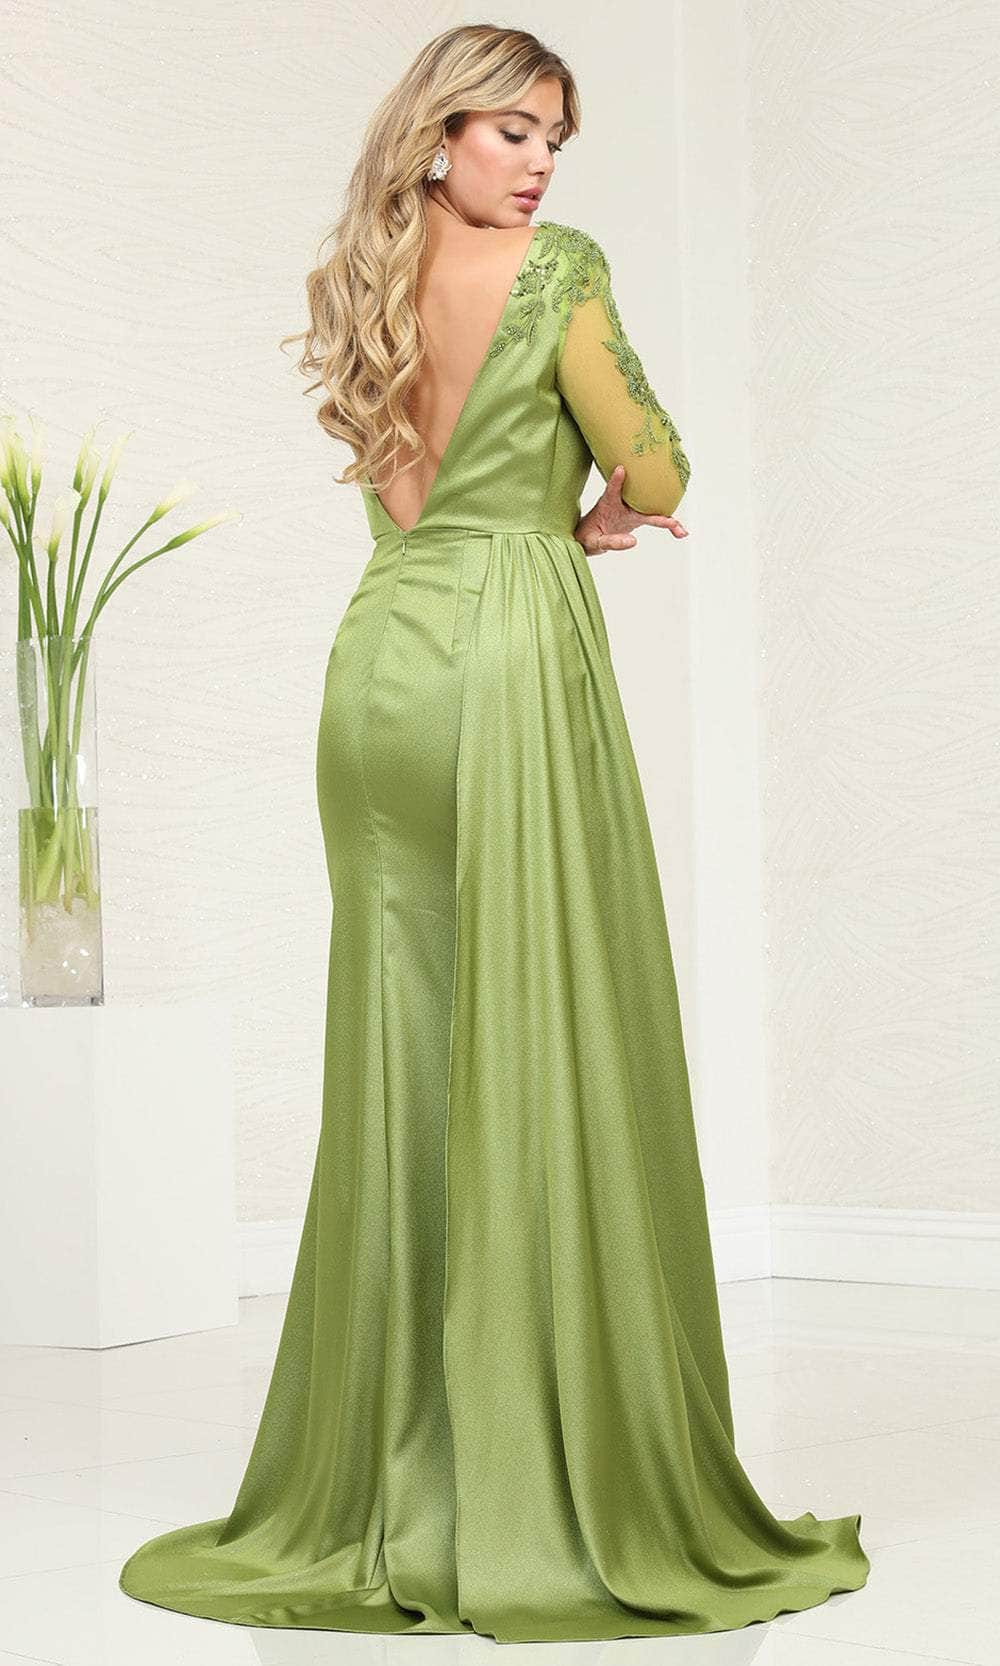 May Queen RQ8045 - Sheer Long Sleeve Ruched Prom Gown Prom Dresses